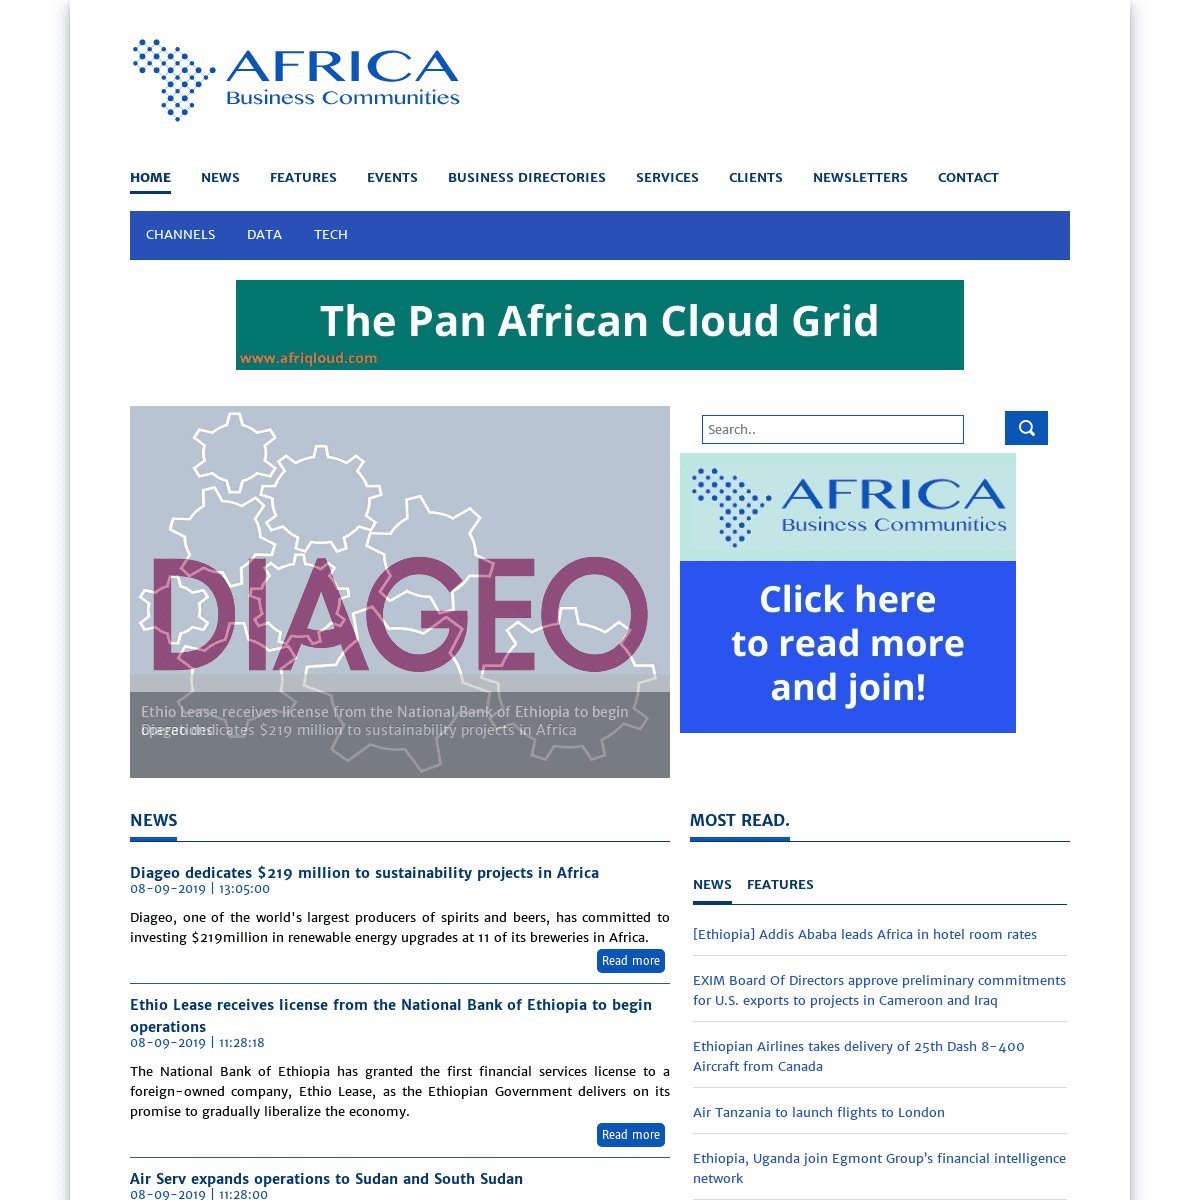 A complete backup of africabusinesscommunities.com